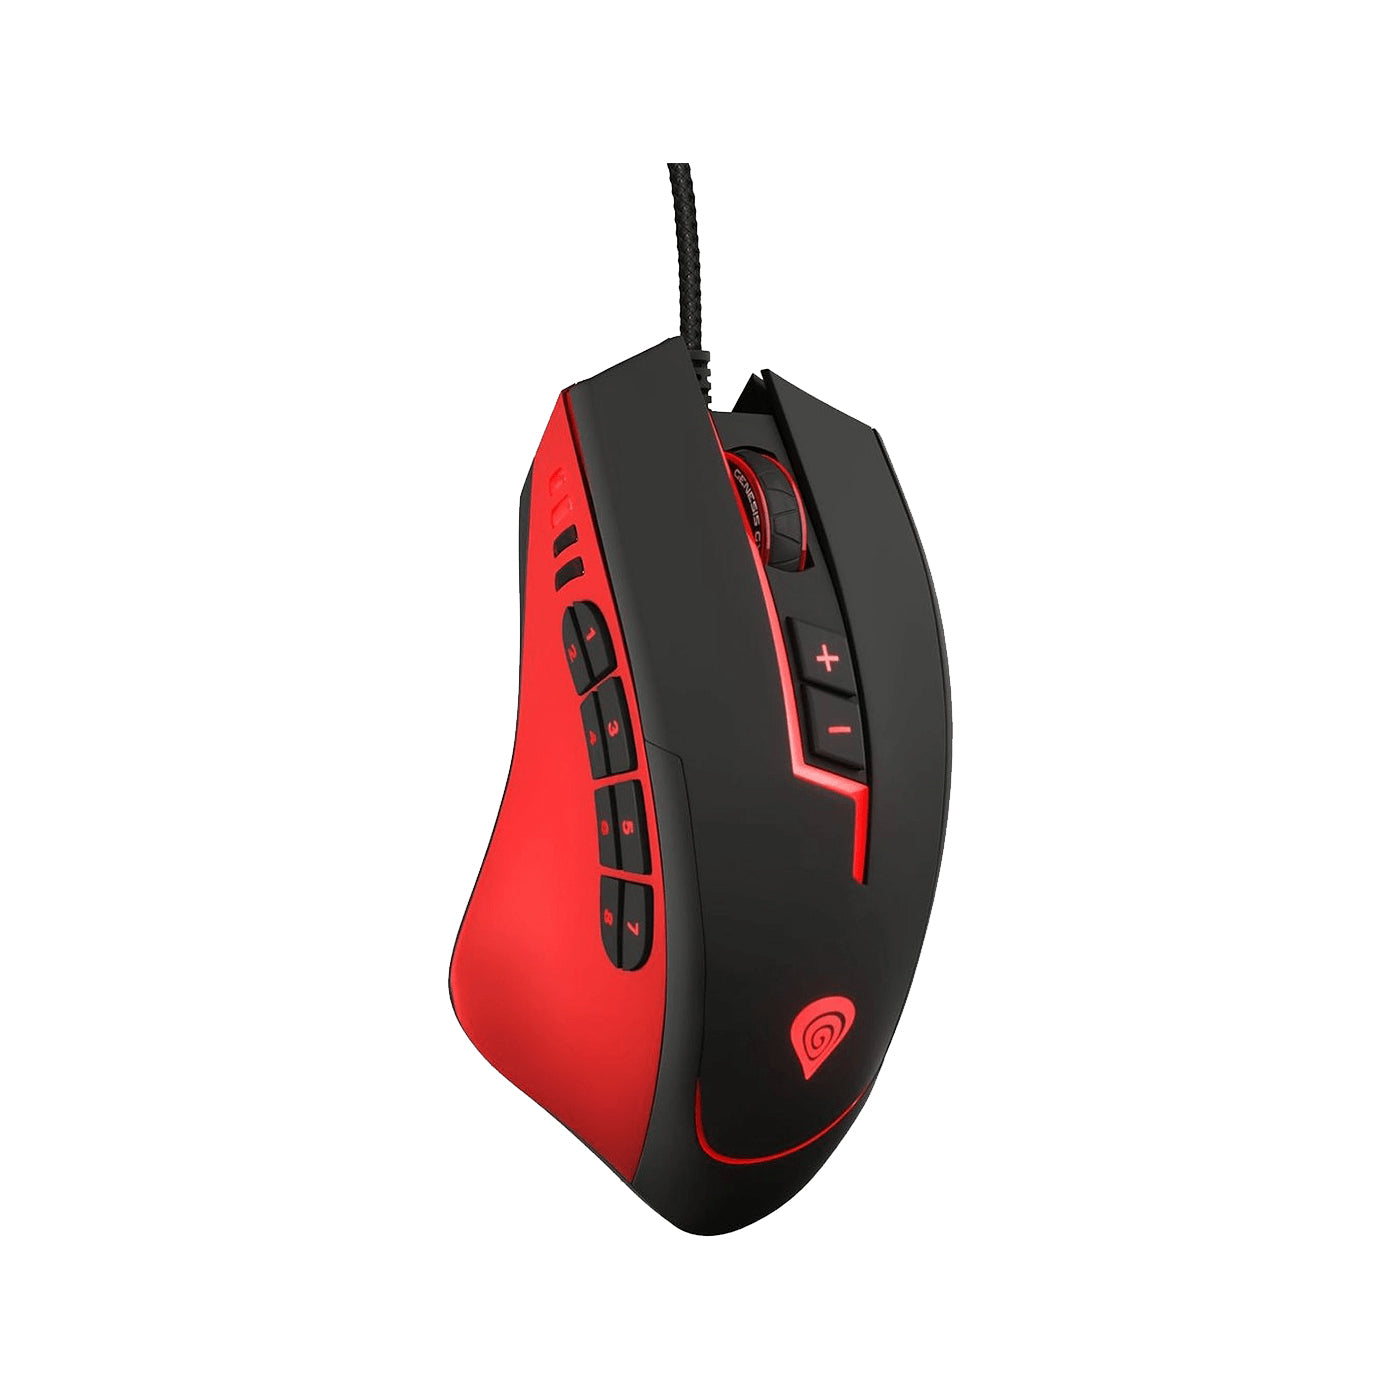 Genesis GX85 NMG-0711 MMO Laser Gaming Mouse (New)